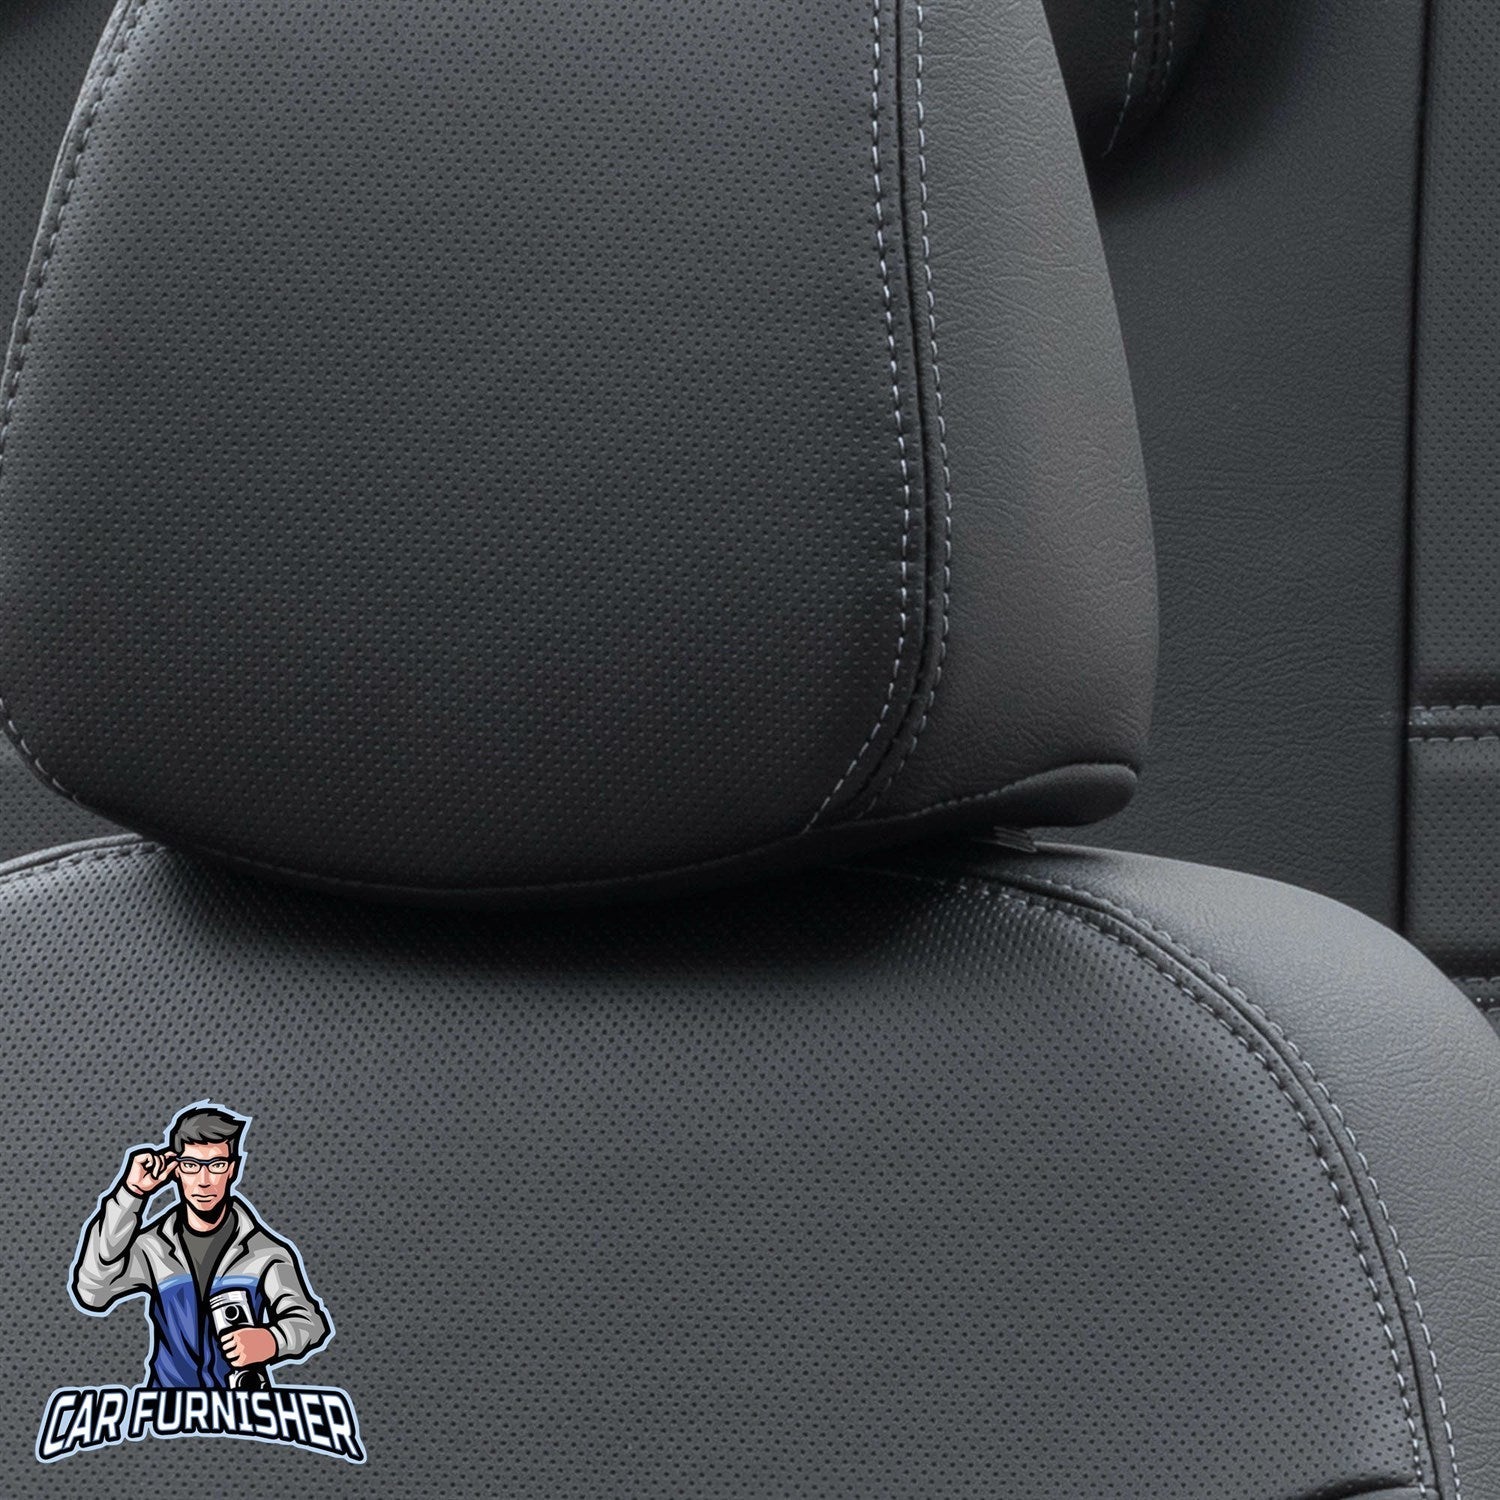 Seat Mii Seat Covers Istanbul Leather Design Black Leather